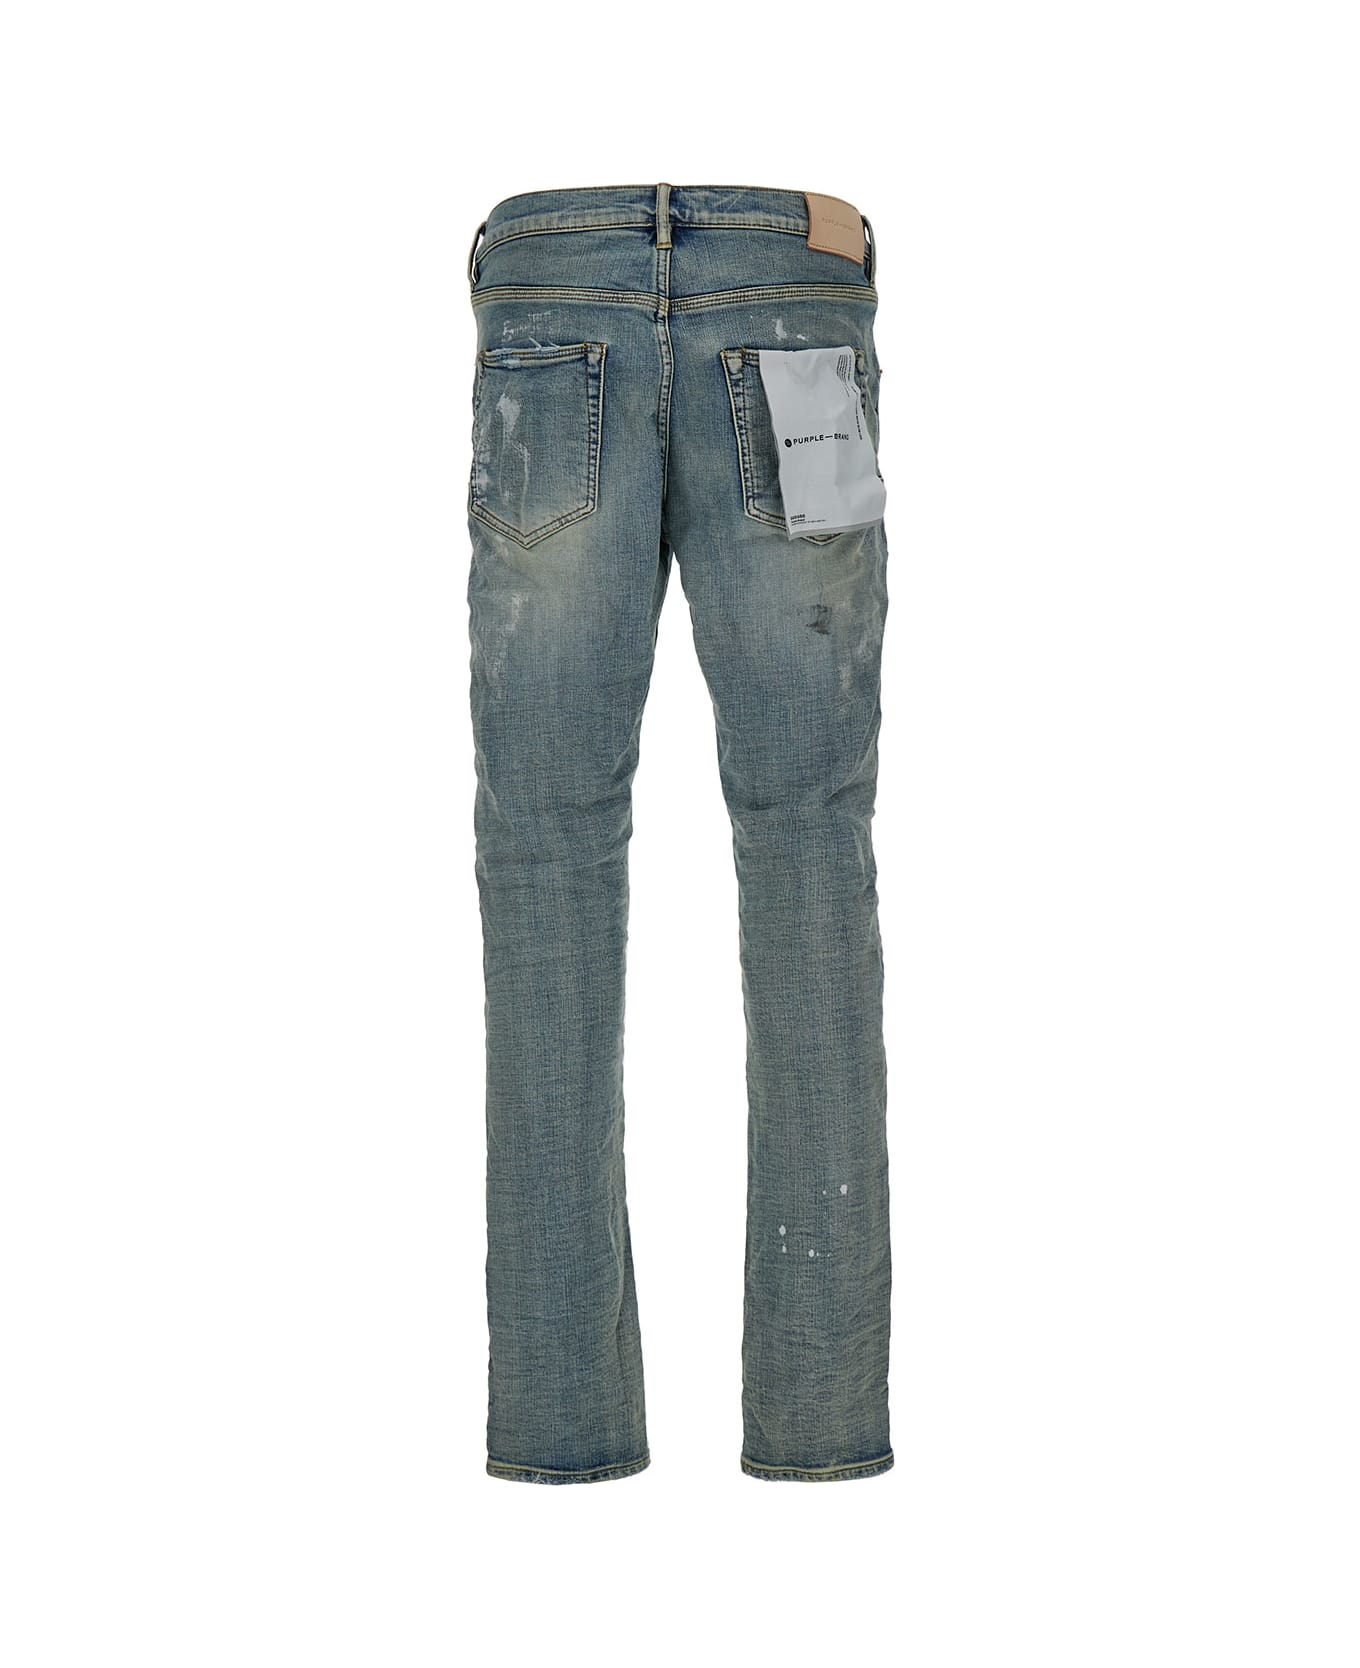 Purple Brand Light Blue Five Pockets Skinny Jeans With Paint Stains In Cotton Denim Man - Light blue